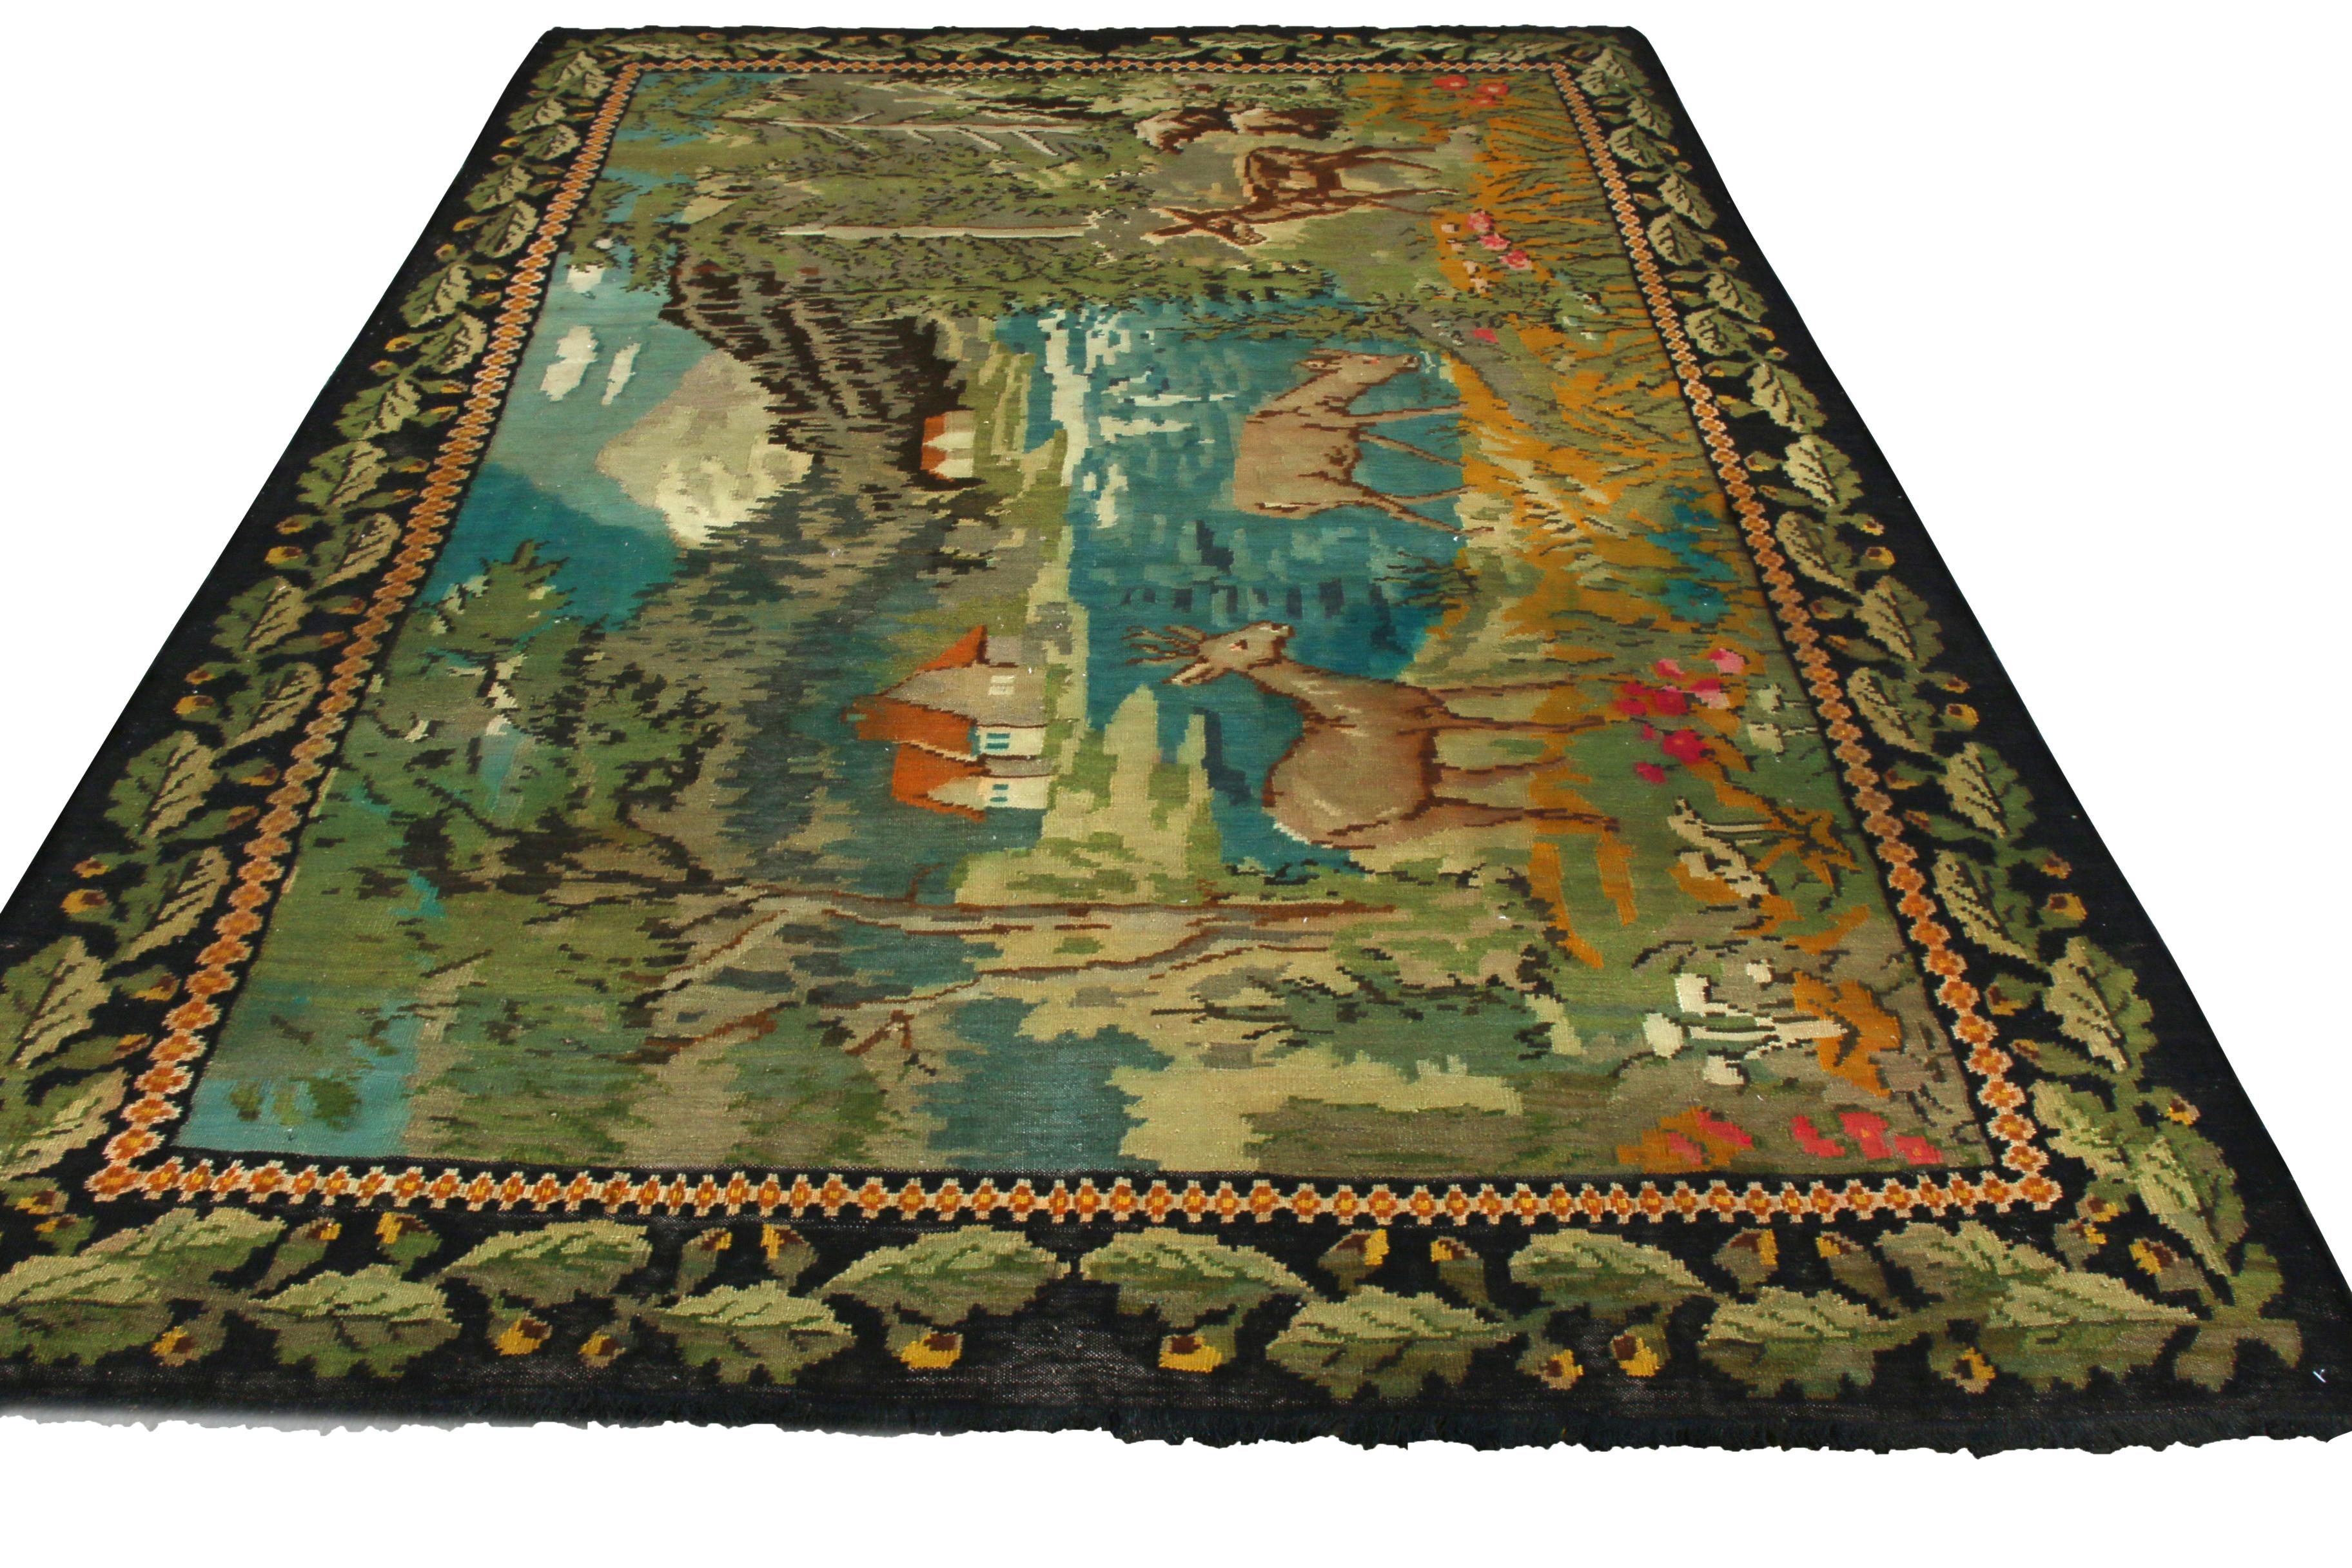 A 7x9 vintage Bessarabian Kilim, handwoven in wool entering Rug & Kilim’s flatweave repertoire in all its antiquity featuring Romanian aesthetics of the 1950s. This creation connotes an idyllic scene of deer and rich forestry against a background of